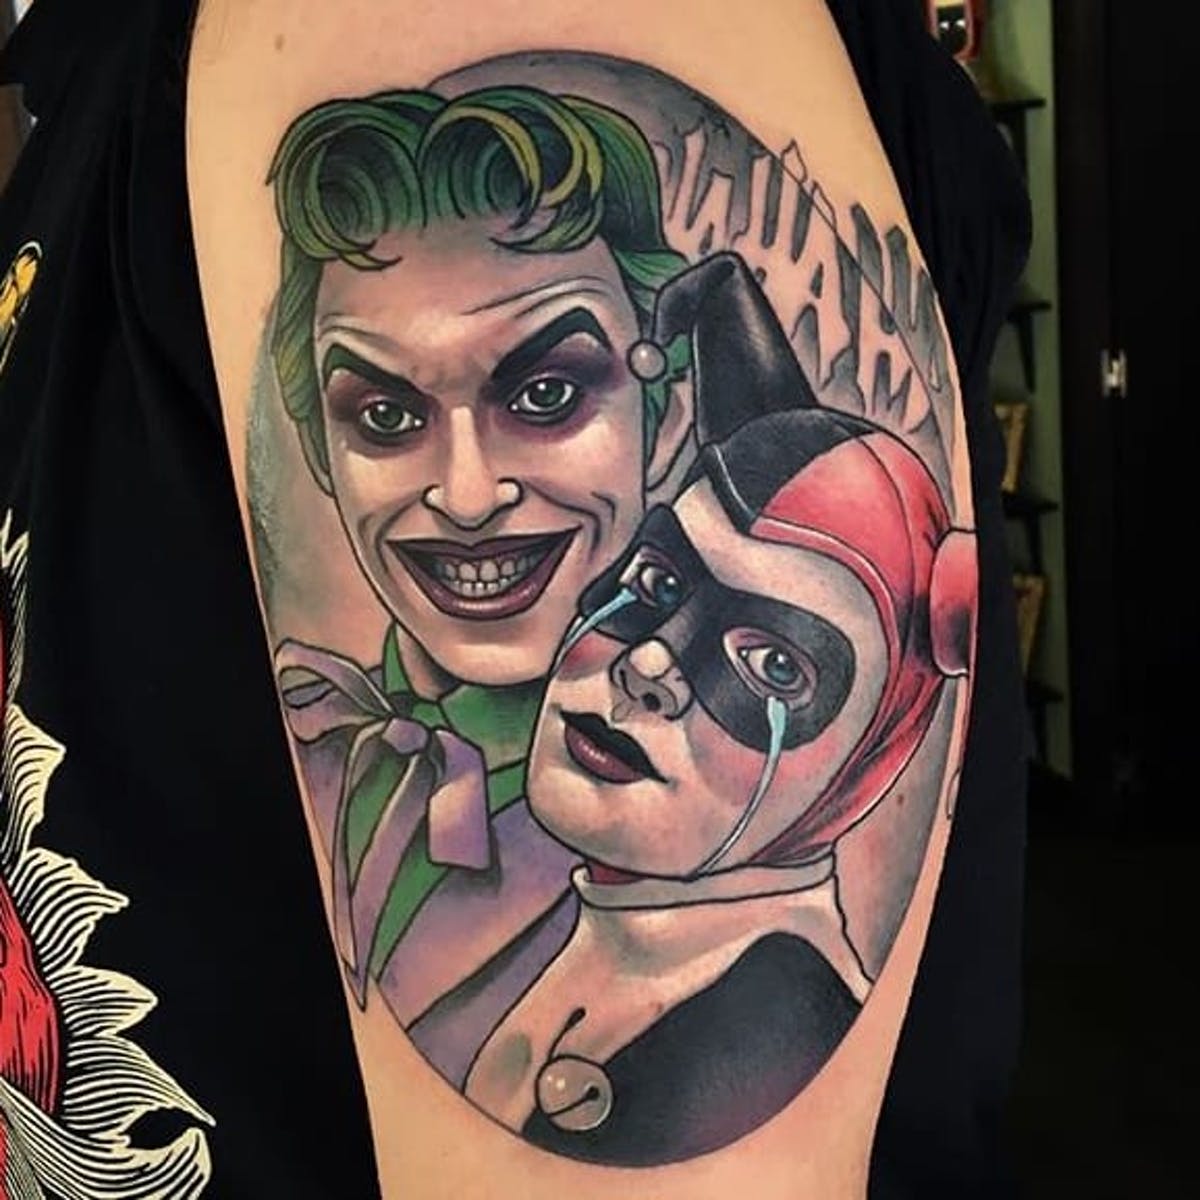 What's So Great About The Joker Harley Quinn Tattoo? 